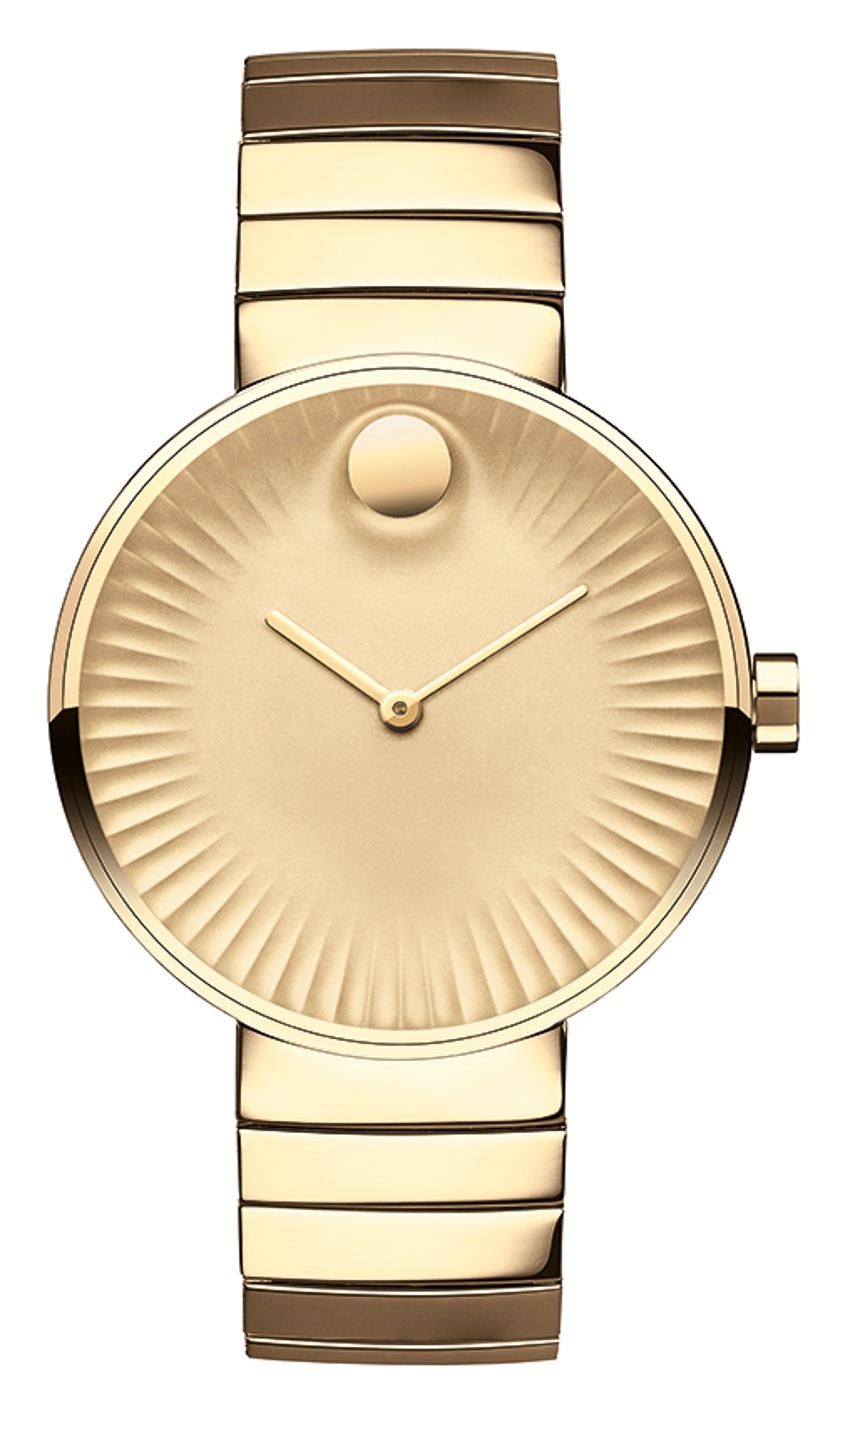 Movado Edge Watches Designed By Yves Behar Watch Releases 